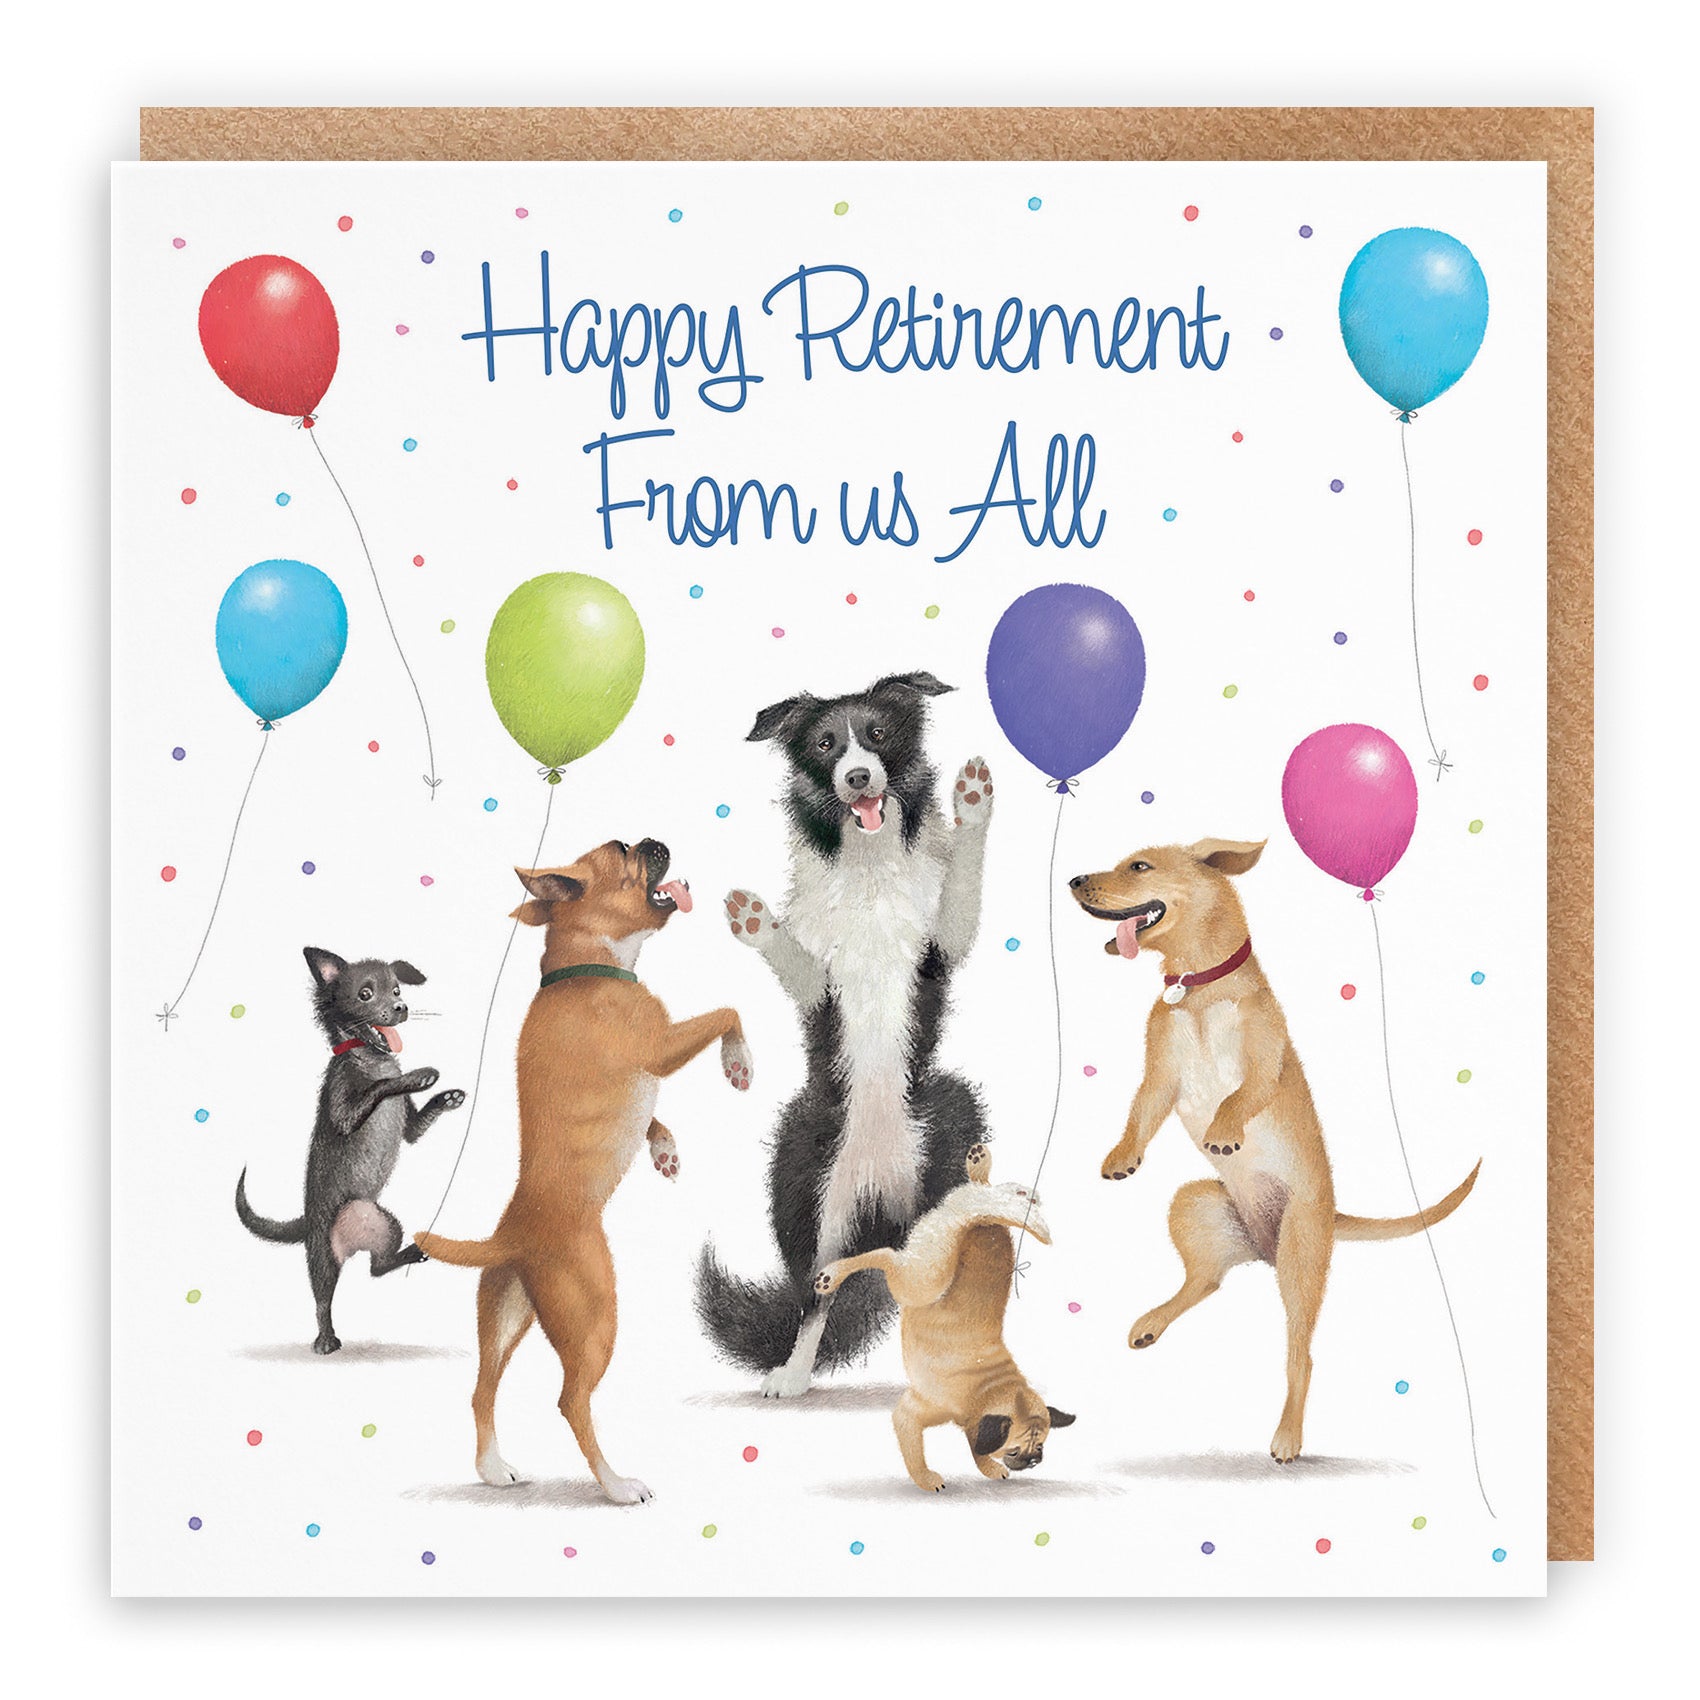 Large Luxury Retirement Card From Us All Dancing Dogs Milo's Gallery - Default Title (B0CXY53KZS)